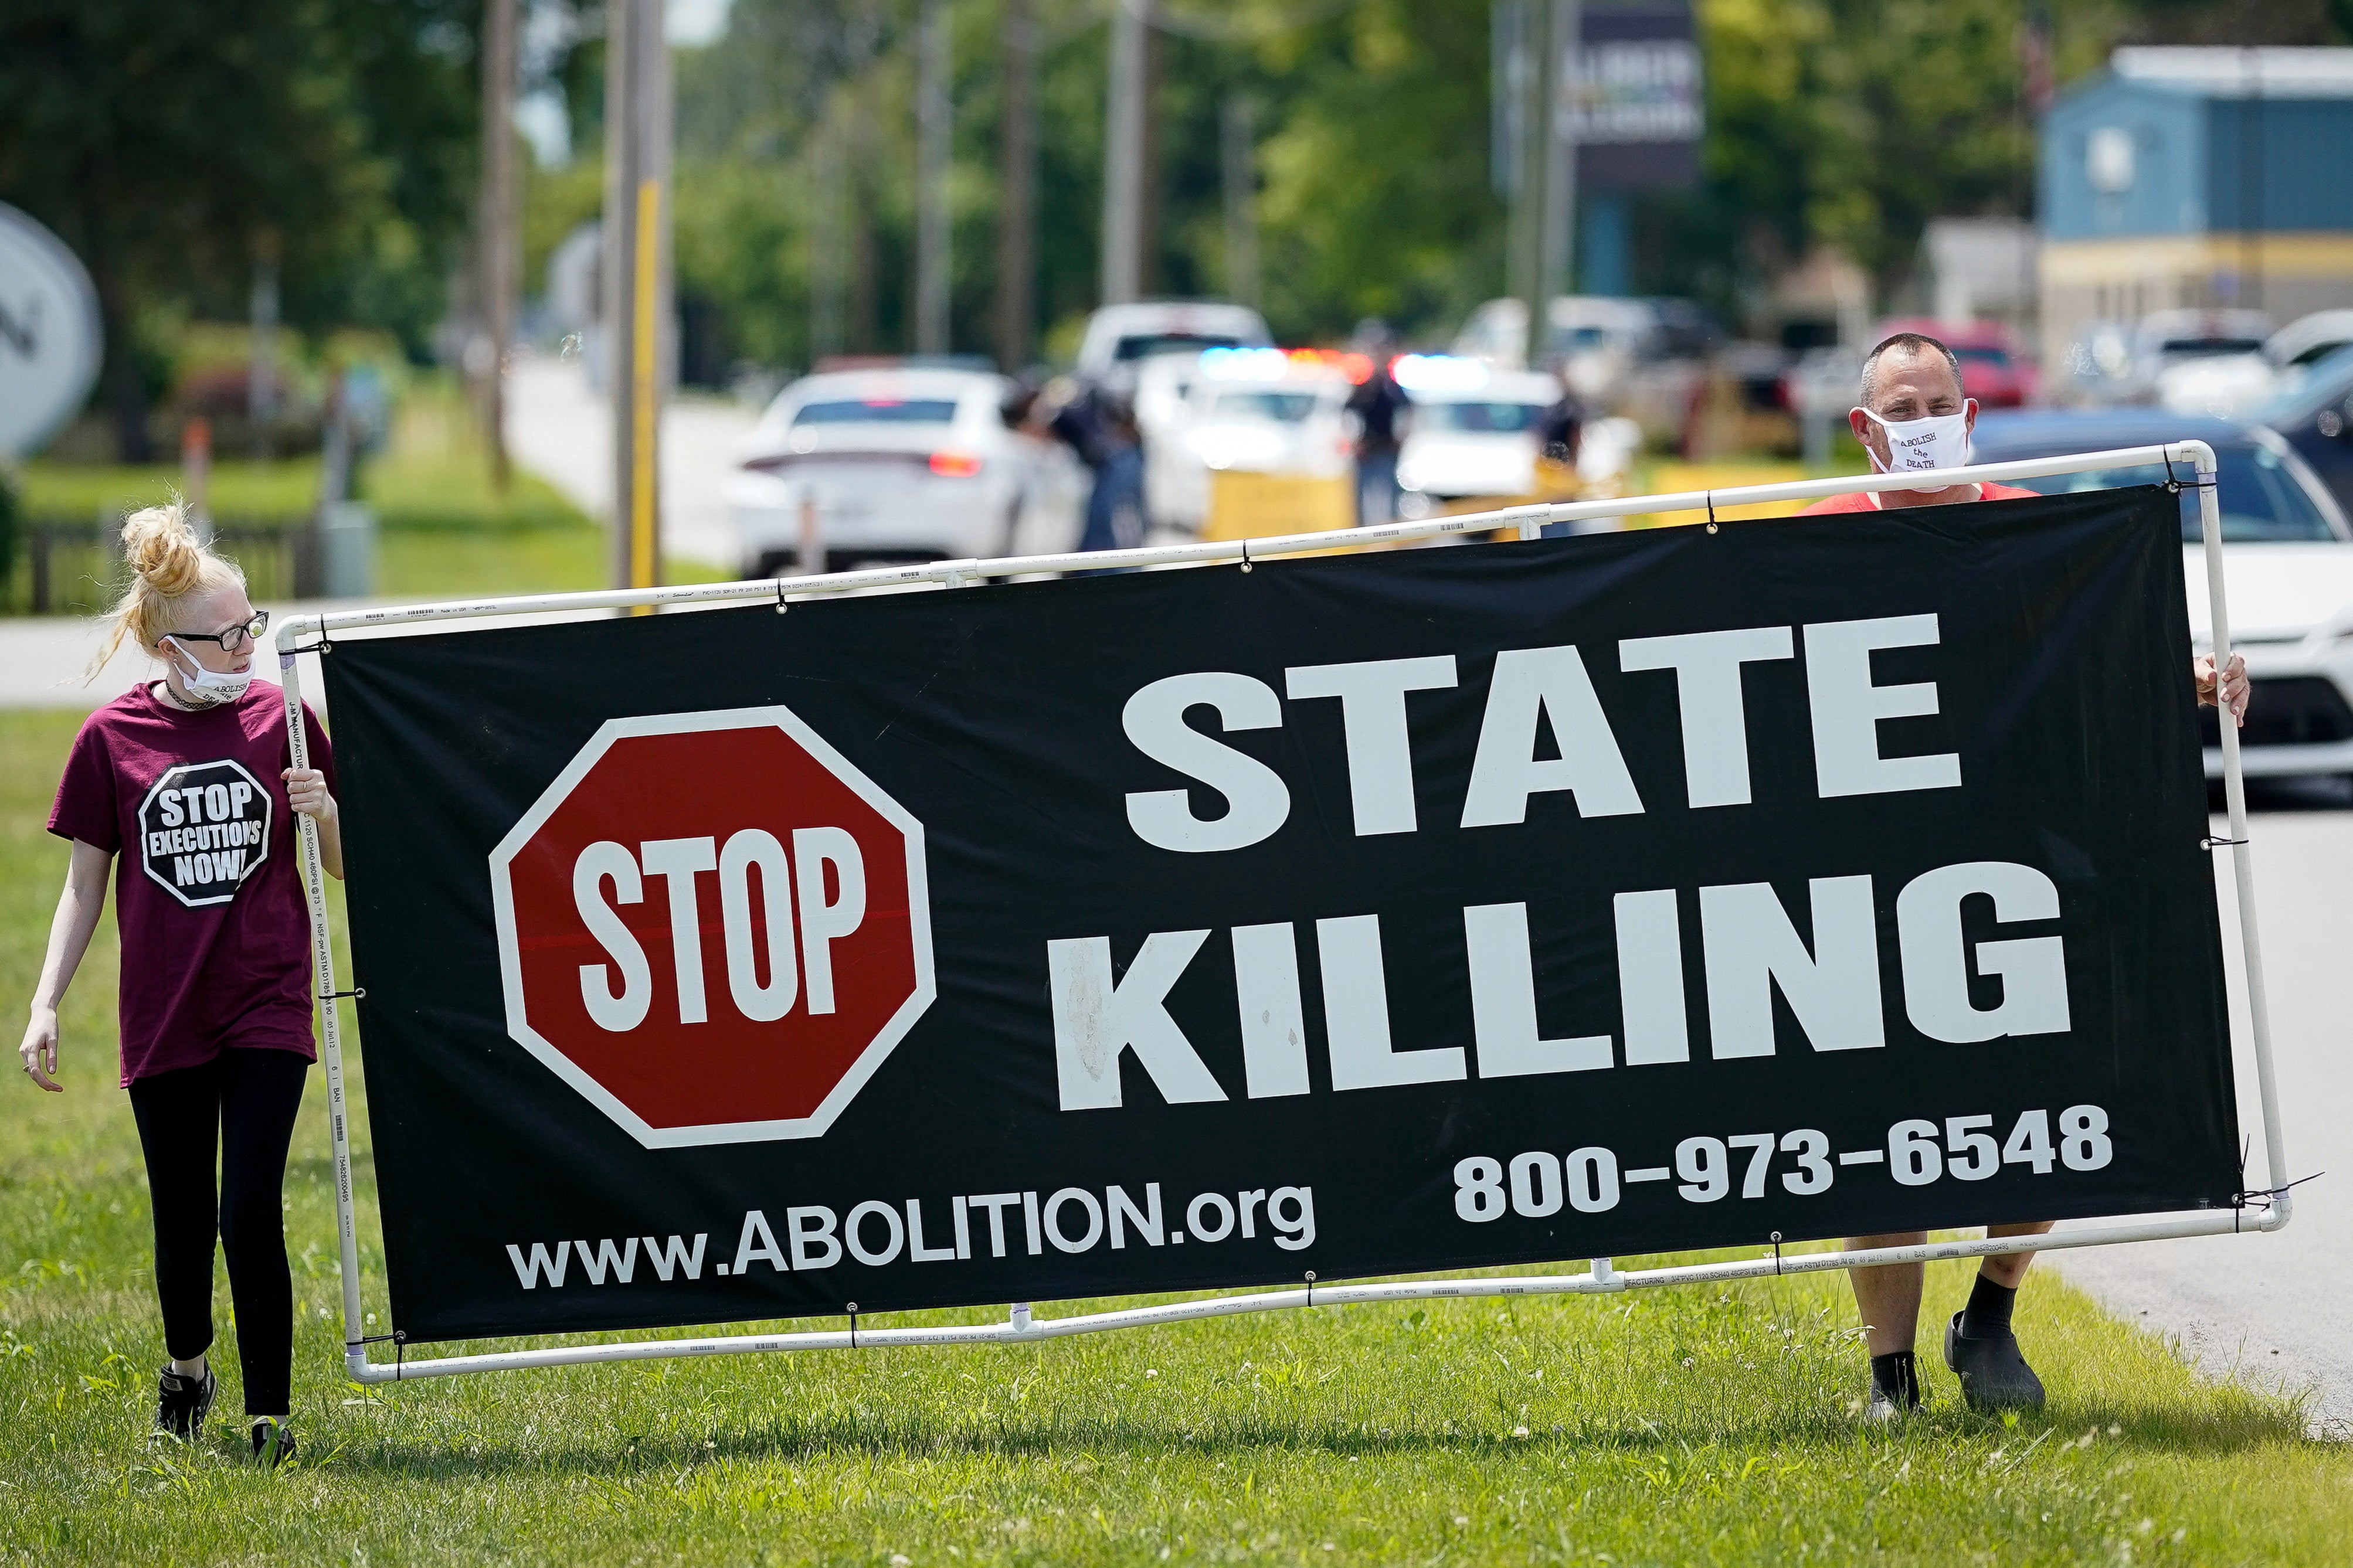 Recent federal executions have led to protests against the death penalty